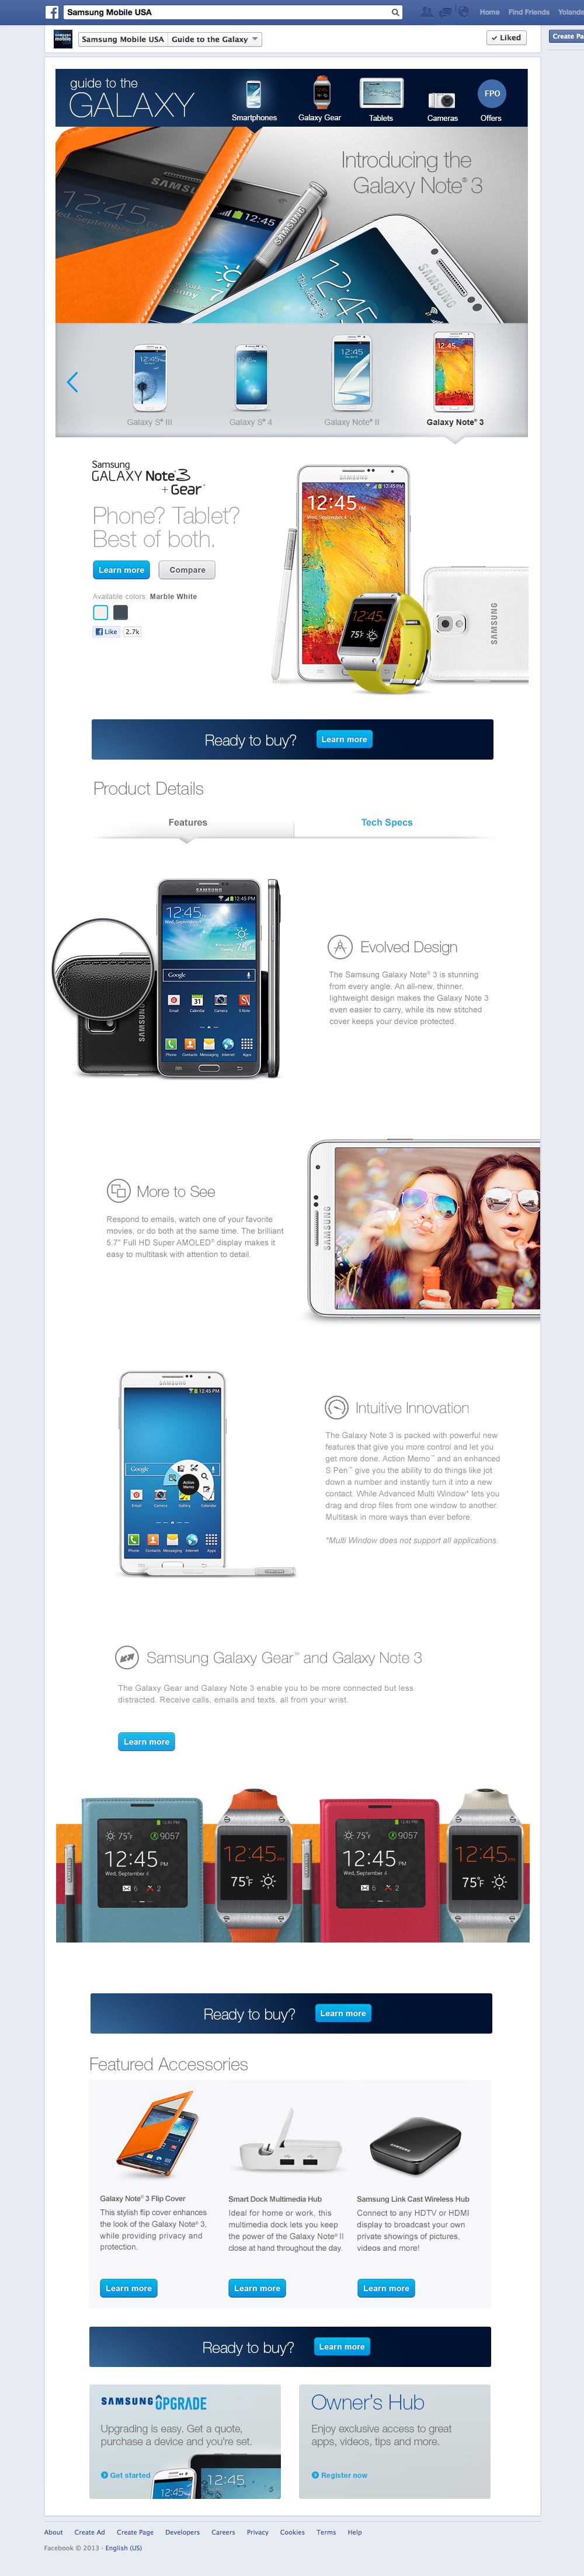 R6_G2G_Smartphone_Family_NoteIII_Features